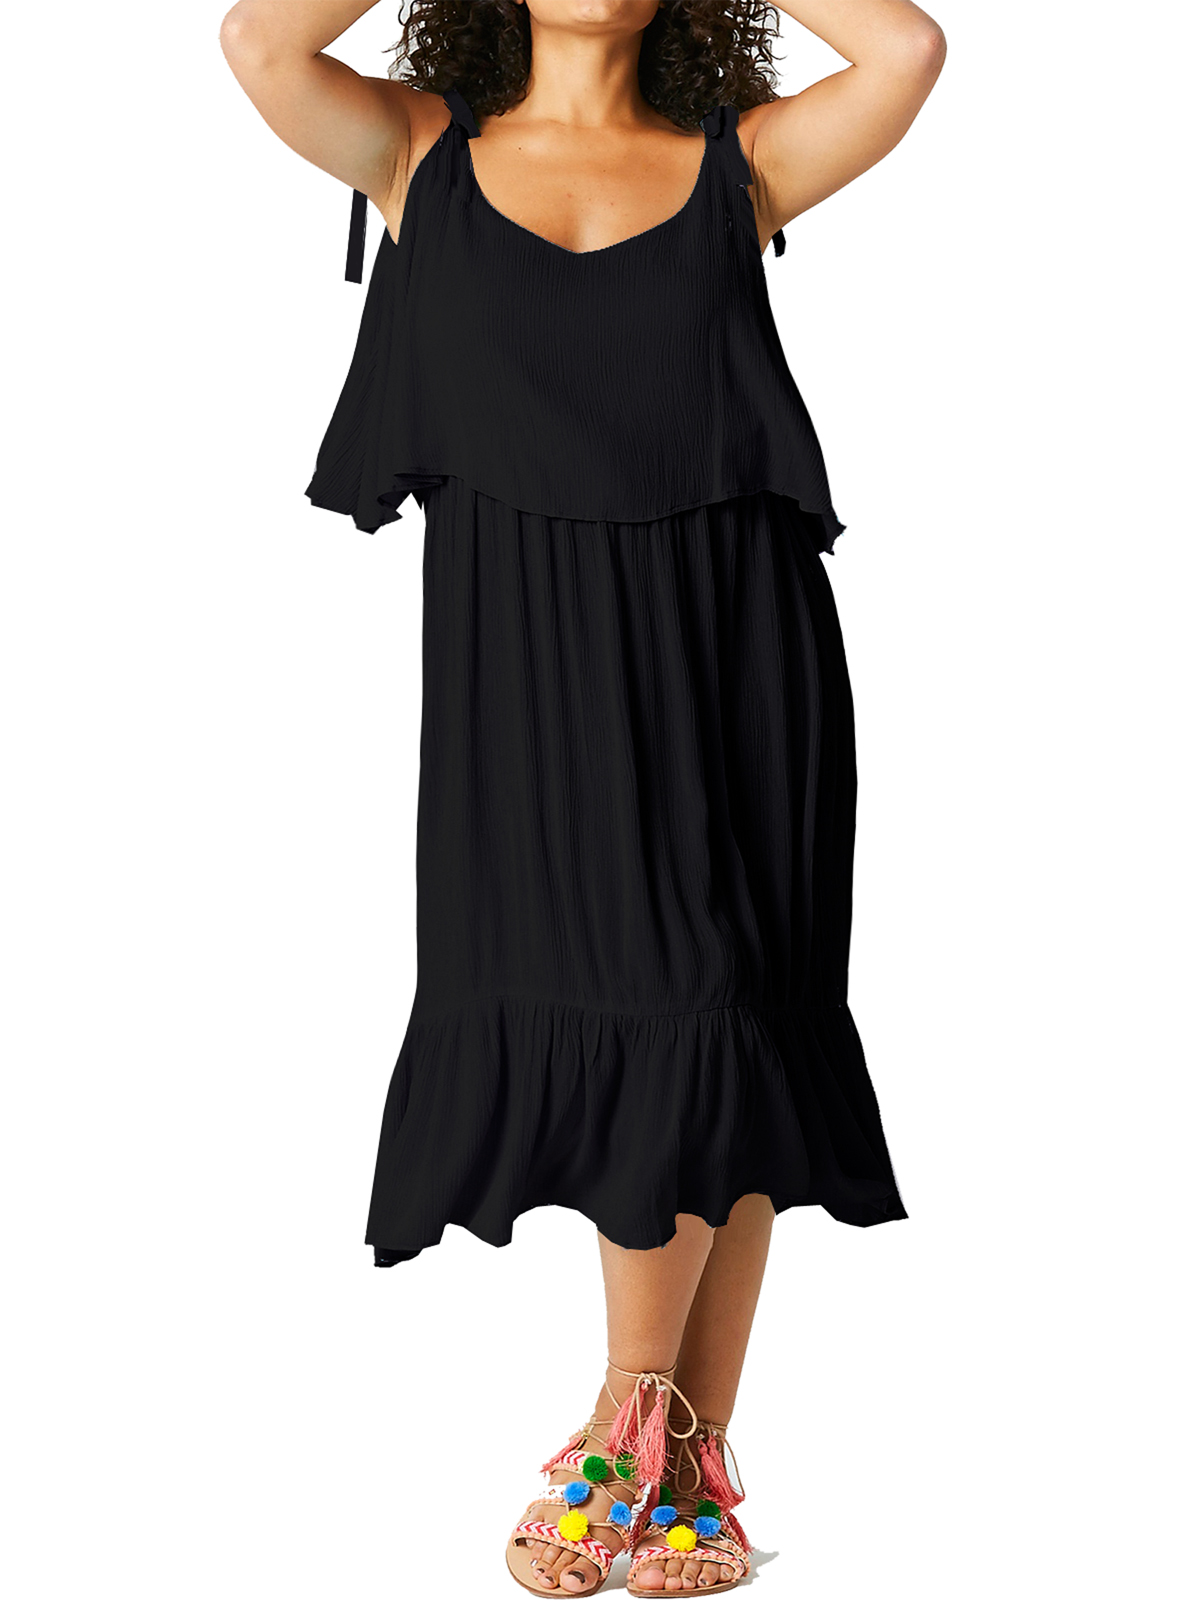 Plus Size wholesale clothing by simply be - - SimplyBe BLACK Double ...